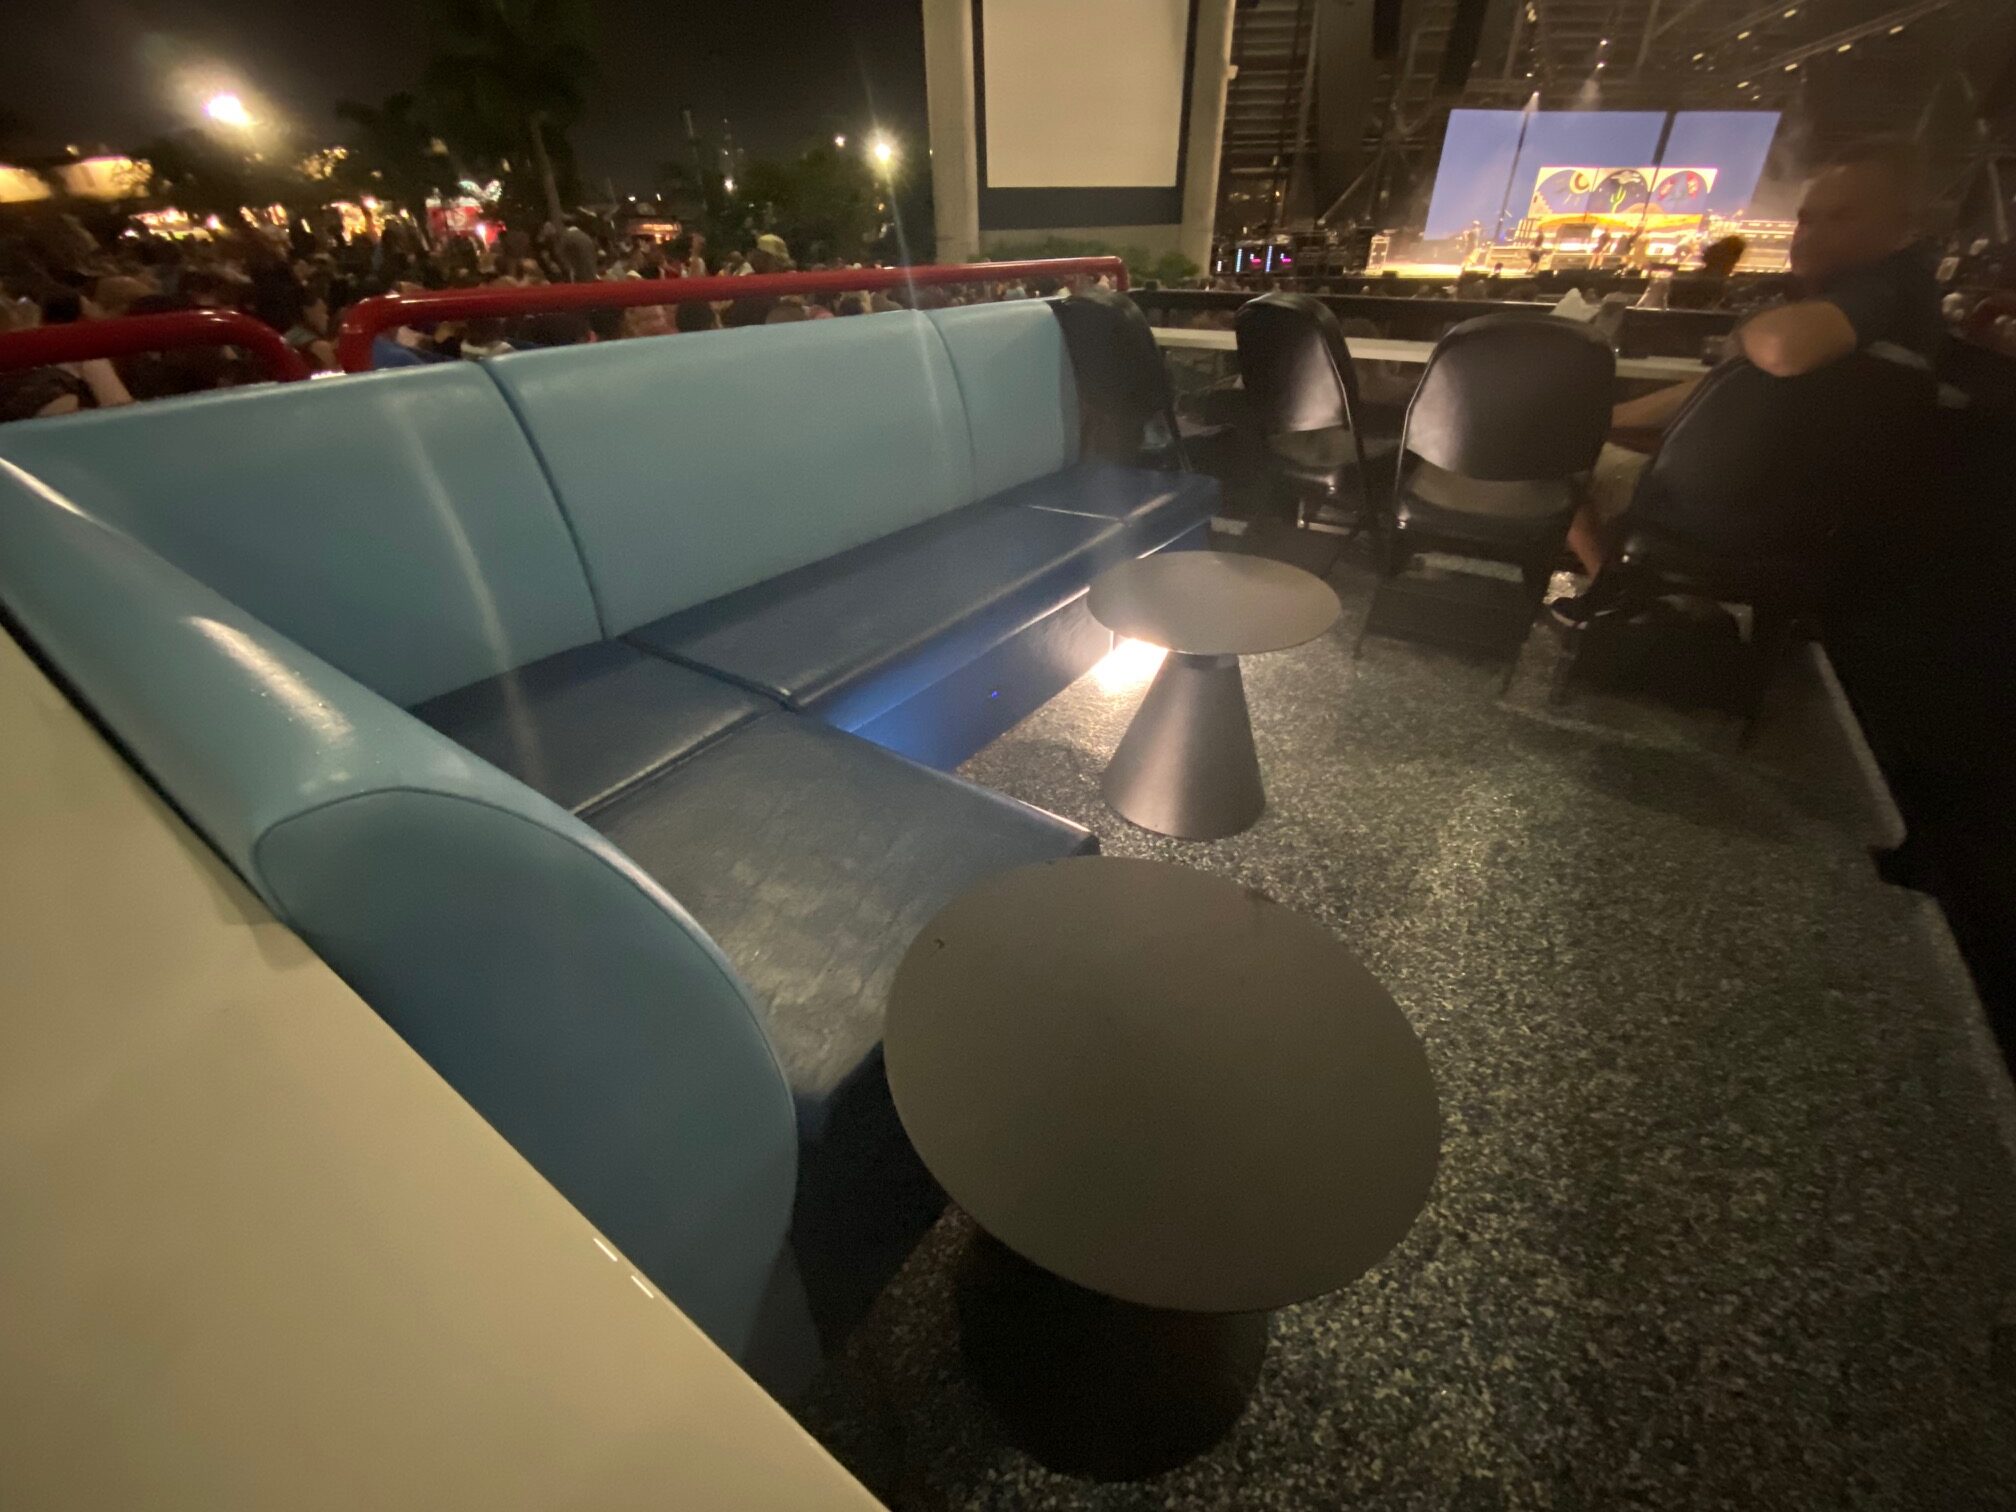 Amphitheater Adds New Rock Box VIP Section Perfect For 12 People